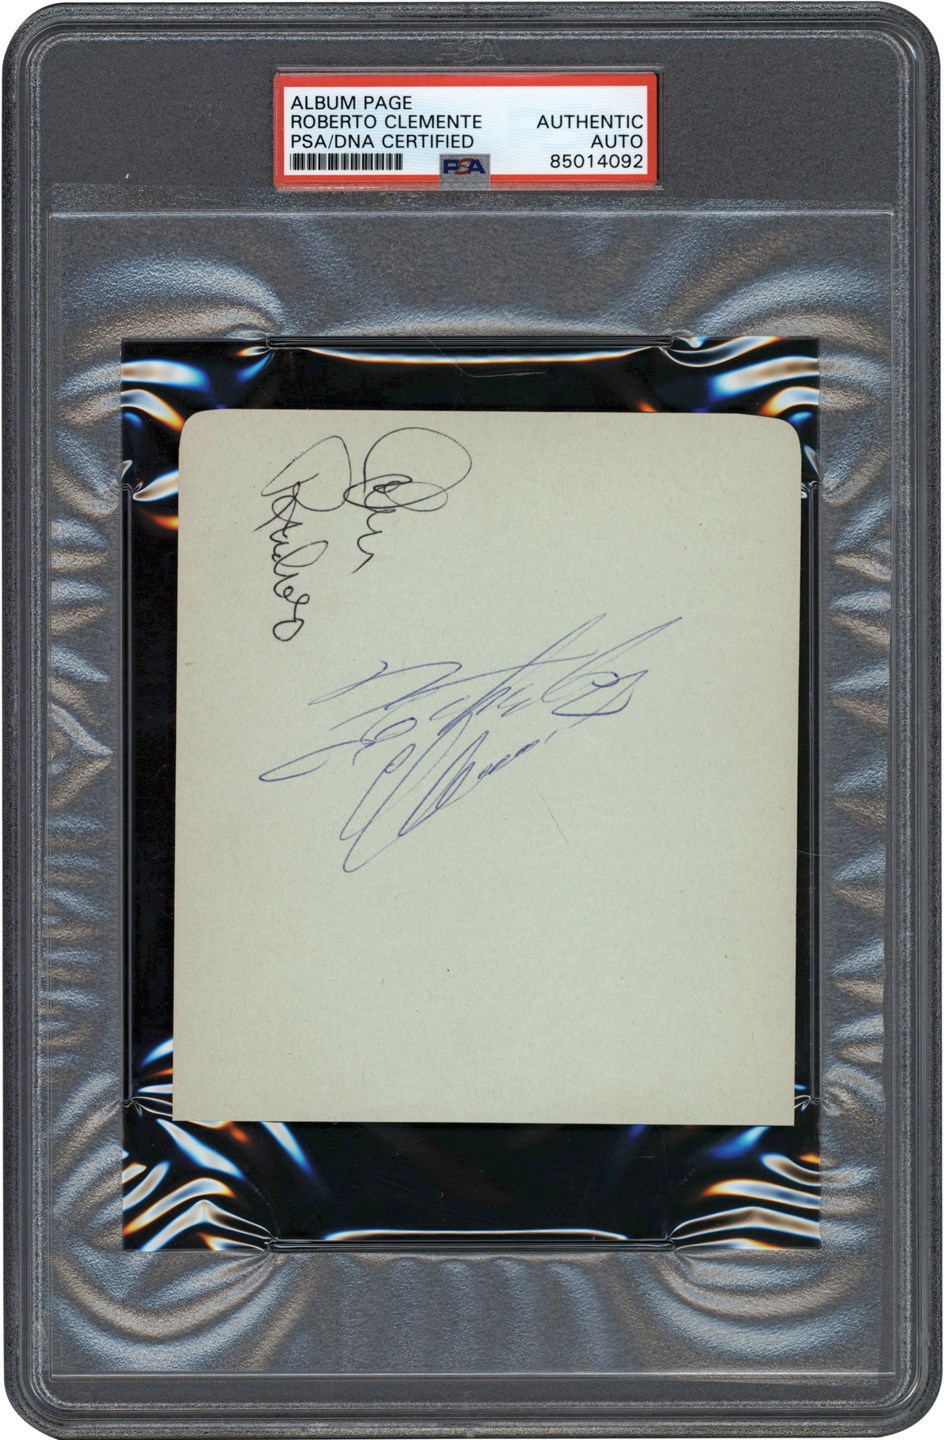 - Roberto Clemente Signed Album Page (PSA)